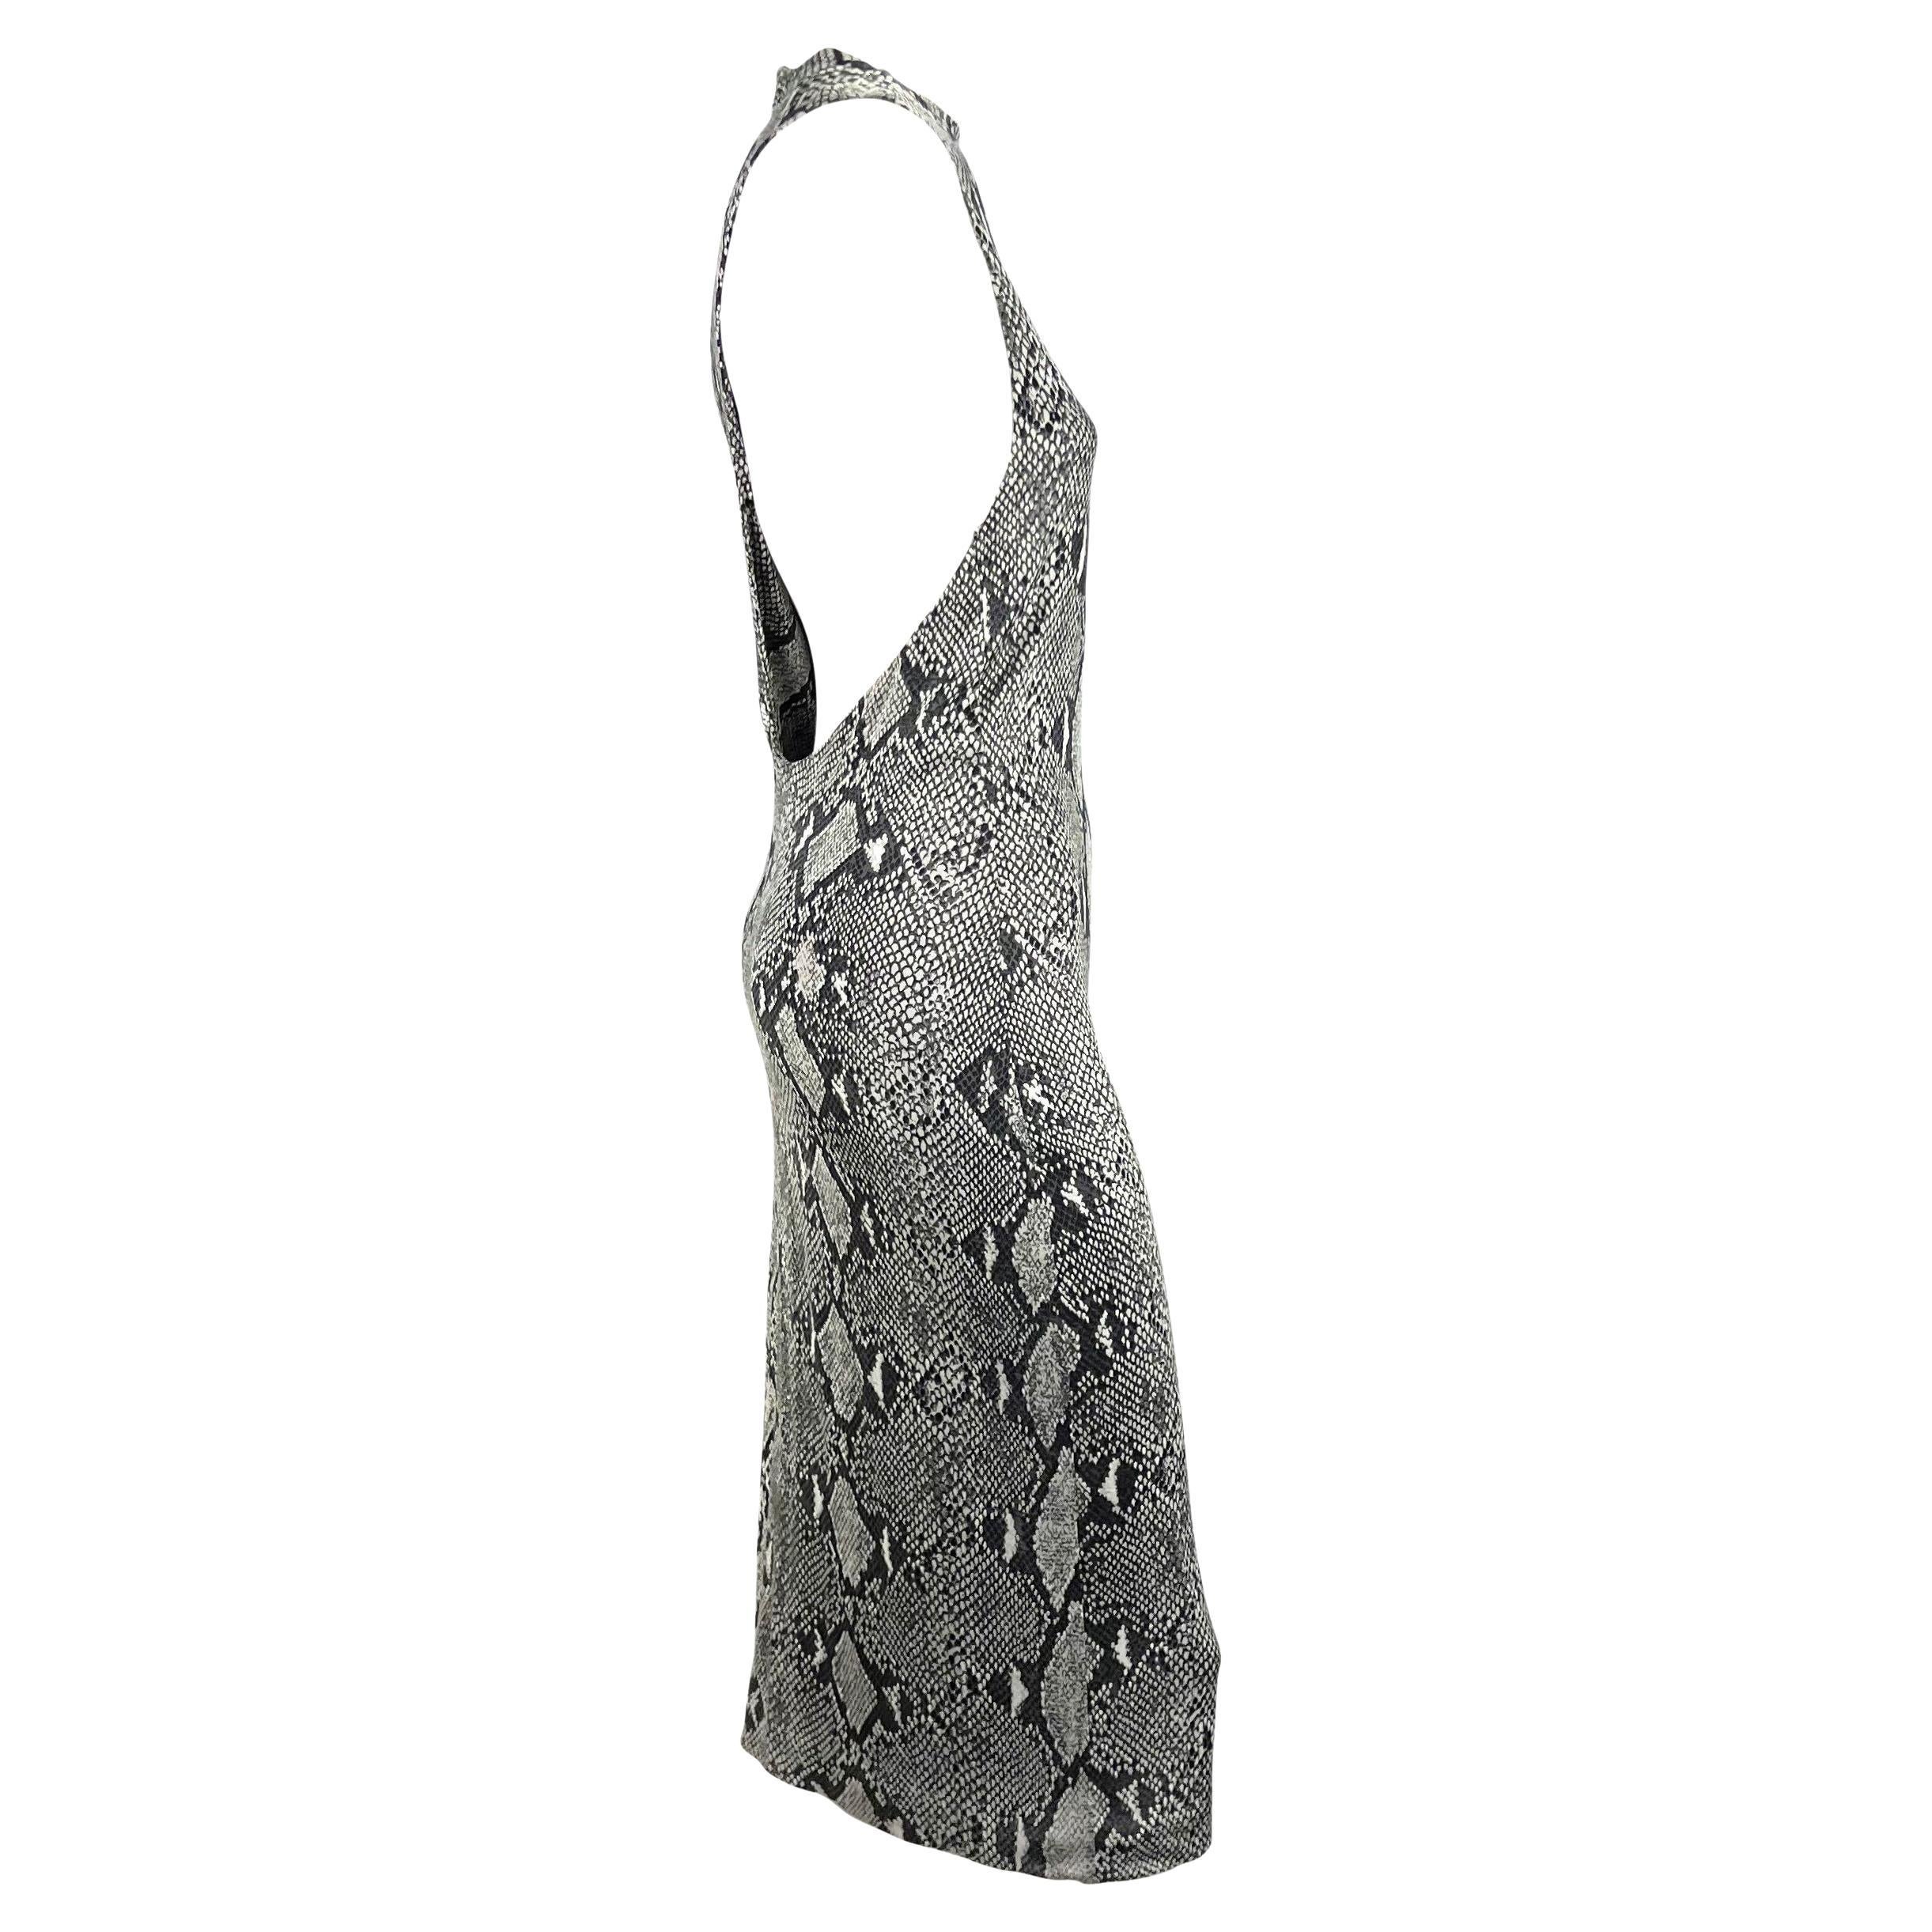 S/S 2000 Gucci by Tom Ford Grey Snake Print Asymmetric One Sleeve Dress For Sale 5